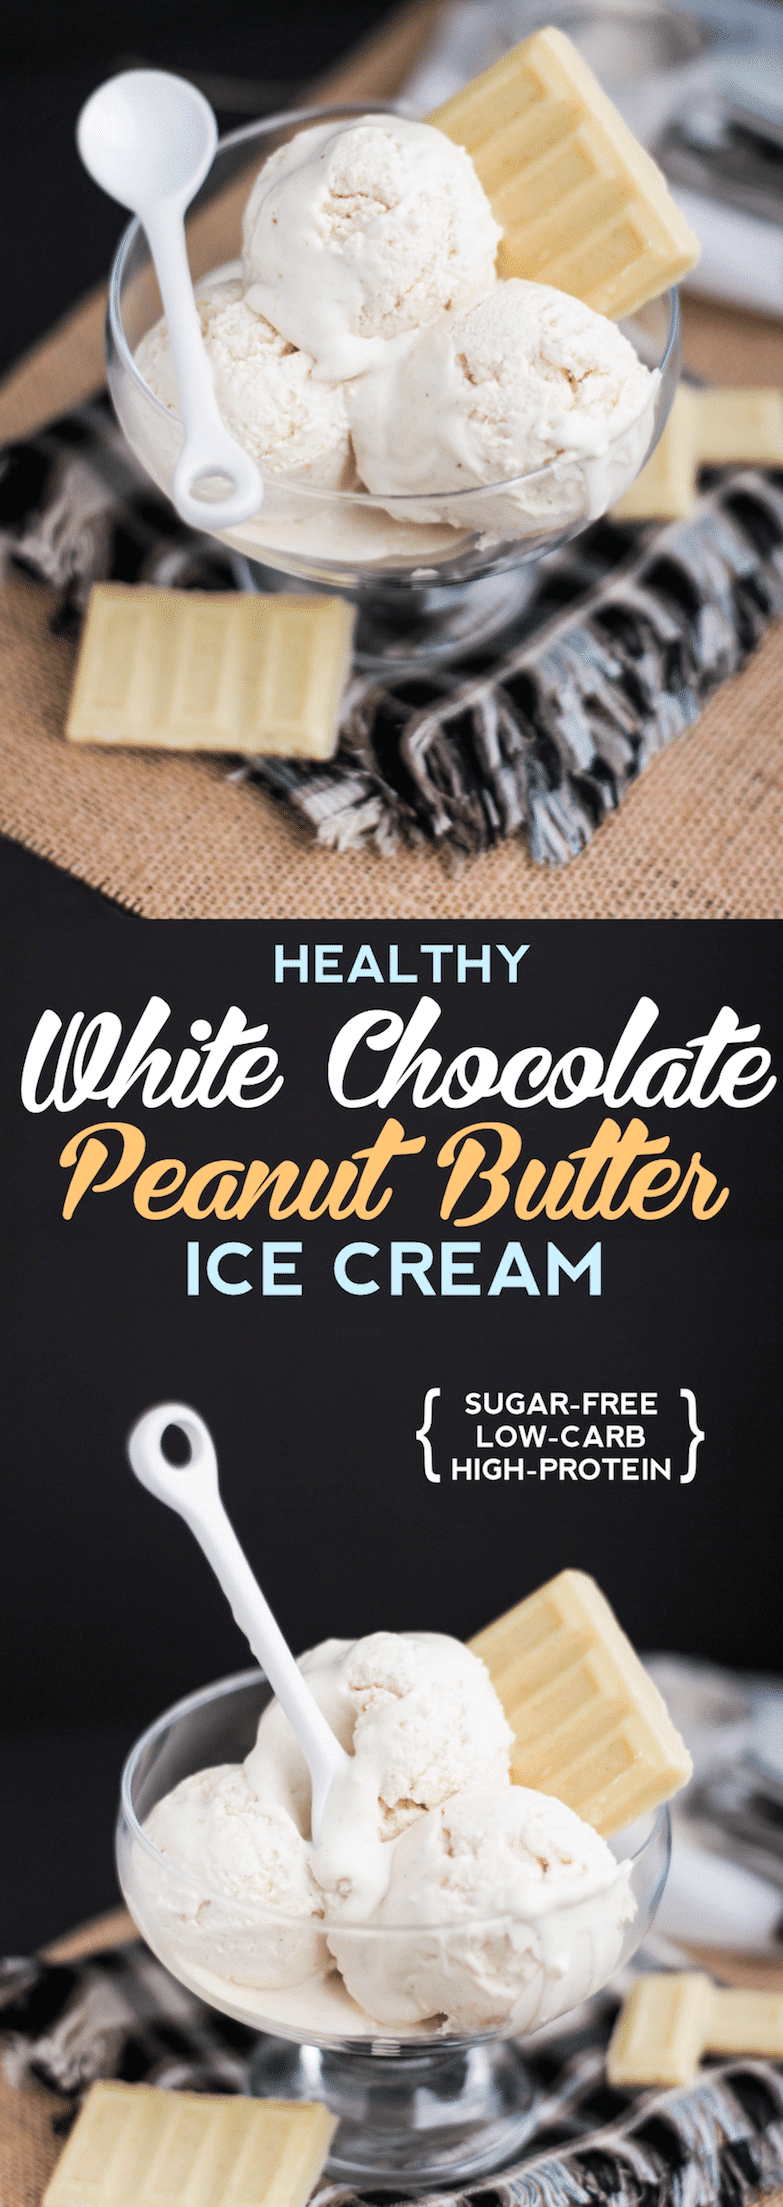 Healthy White Chocolate Peanut Butter Ice Cream recipe (sugar free, low carb, high protein) - Desserts with Benefits